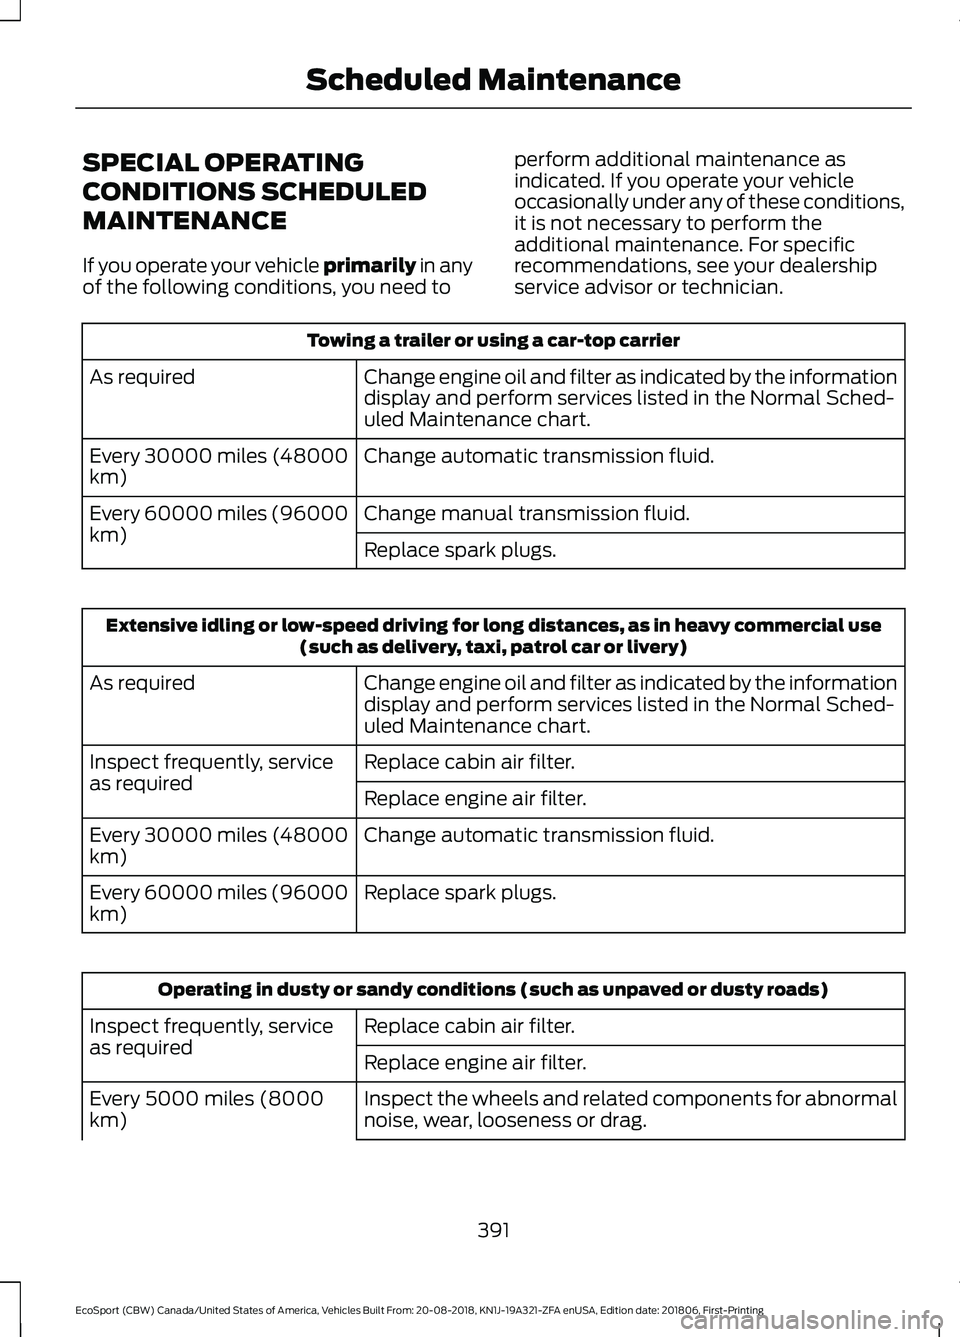 FORD ECOSPORT 2019  Owners Manual SPECIAL OPERATING
CONDITIONS SCHEDULED
MAINTENANCE
If you operate your vehicle primarily in anyof the following conditions, you need to
perform additional maintenance asindicated. If you operate your 